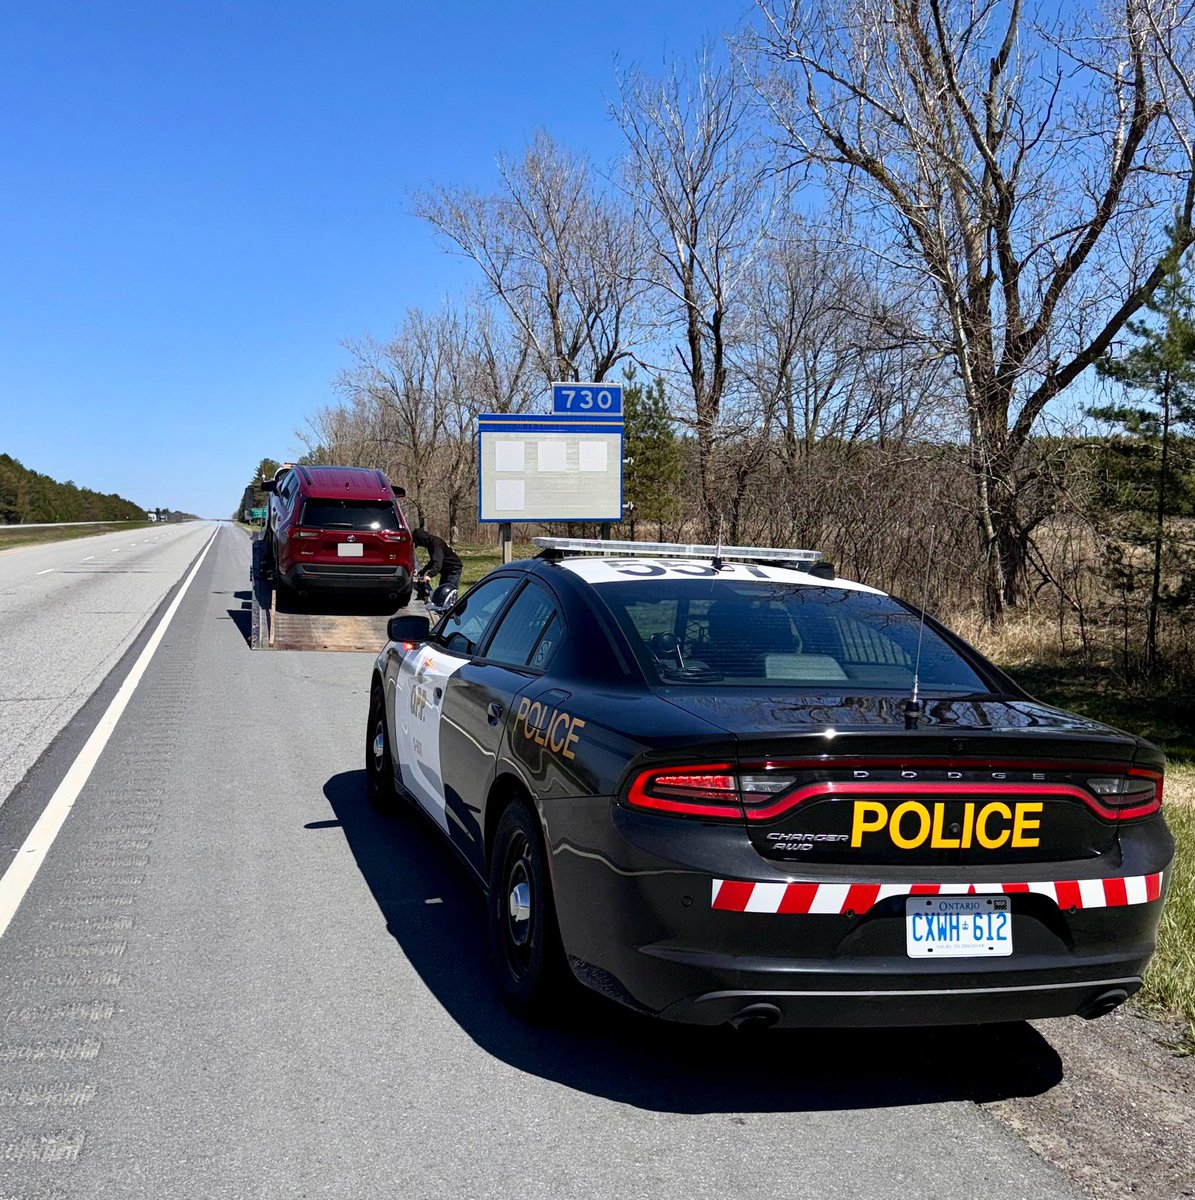 Proactive speed enforcement by #GrenvilleOPP resulted in this driver having their vehicle impounded and licence suspended for #StuntDriving - 157 km/h on #Hwy401 in @twpec.
Speeds like this are dangerous and put other road users at risk - #SlowDown because #SpeedKills. ^dh